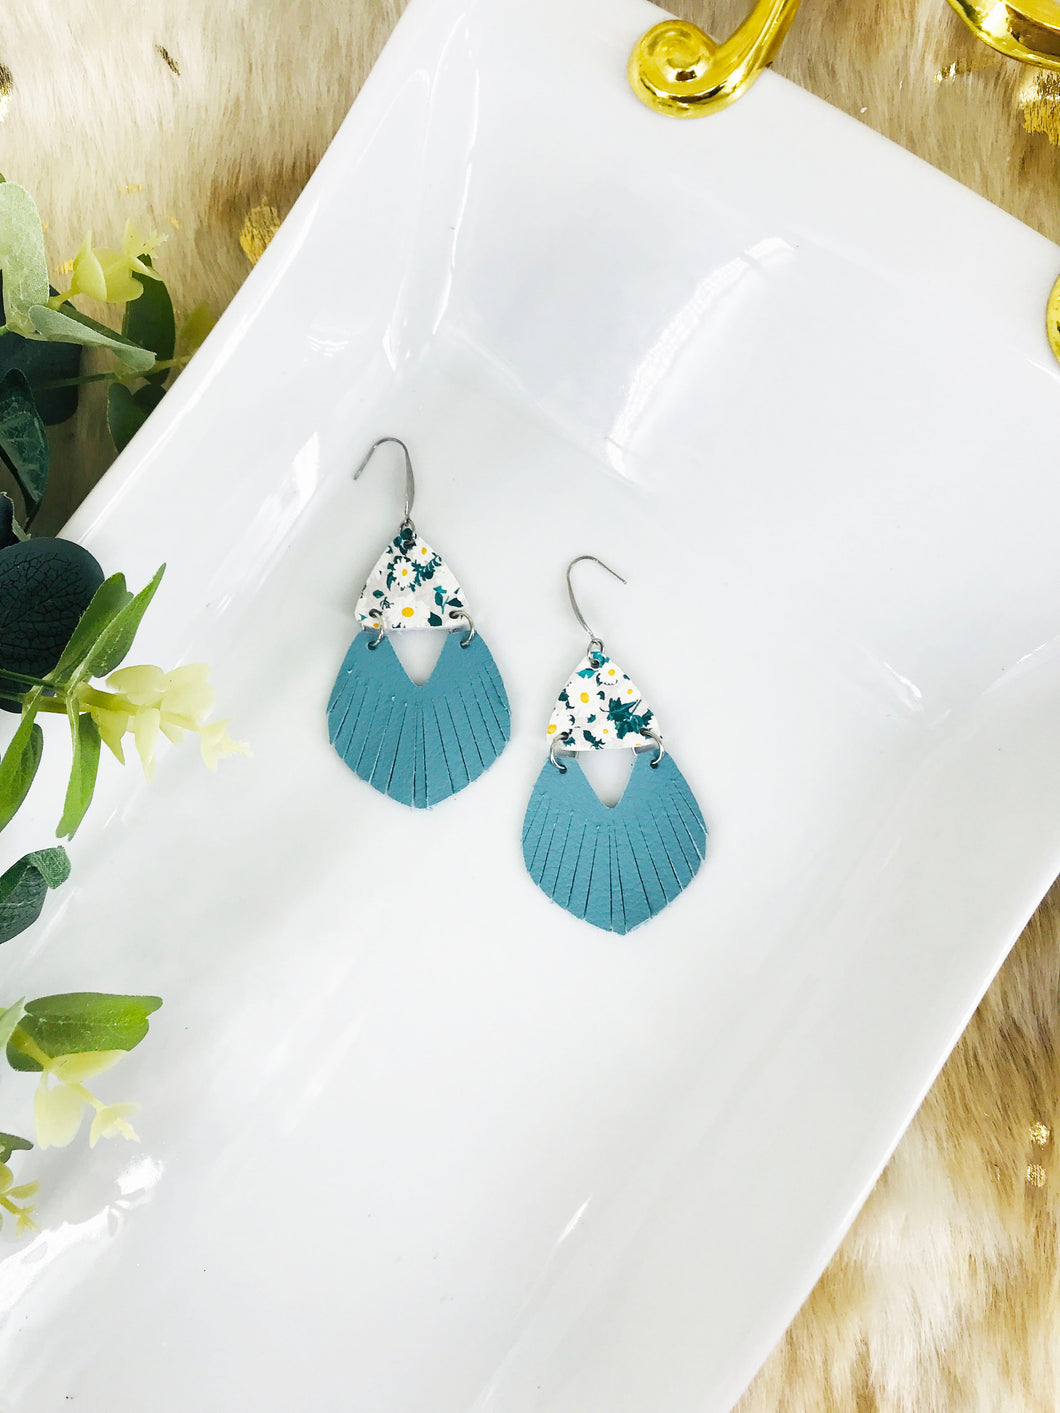 Daisy Leather and Blue Fringe Leather Earrings - E19-2898